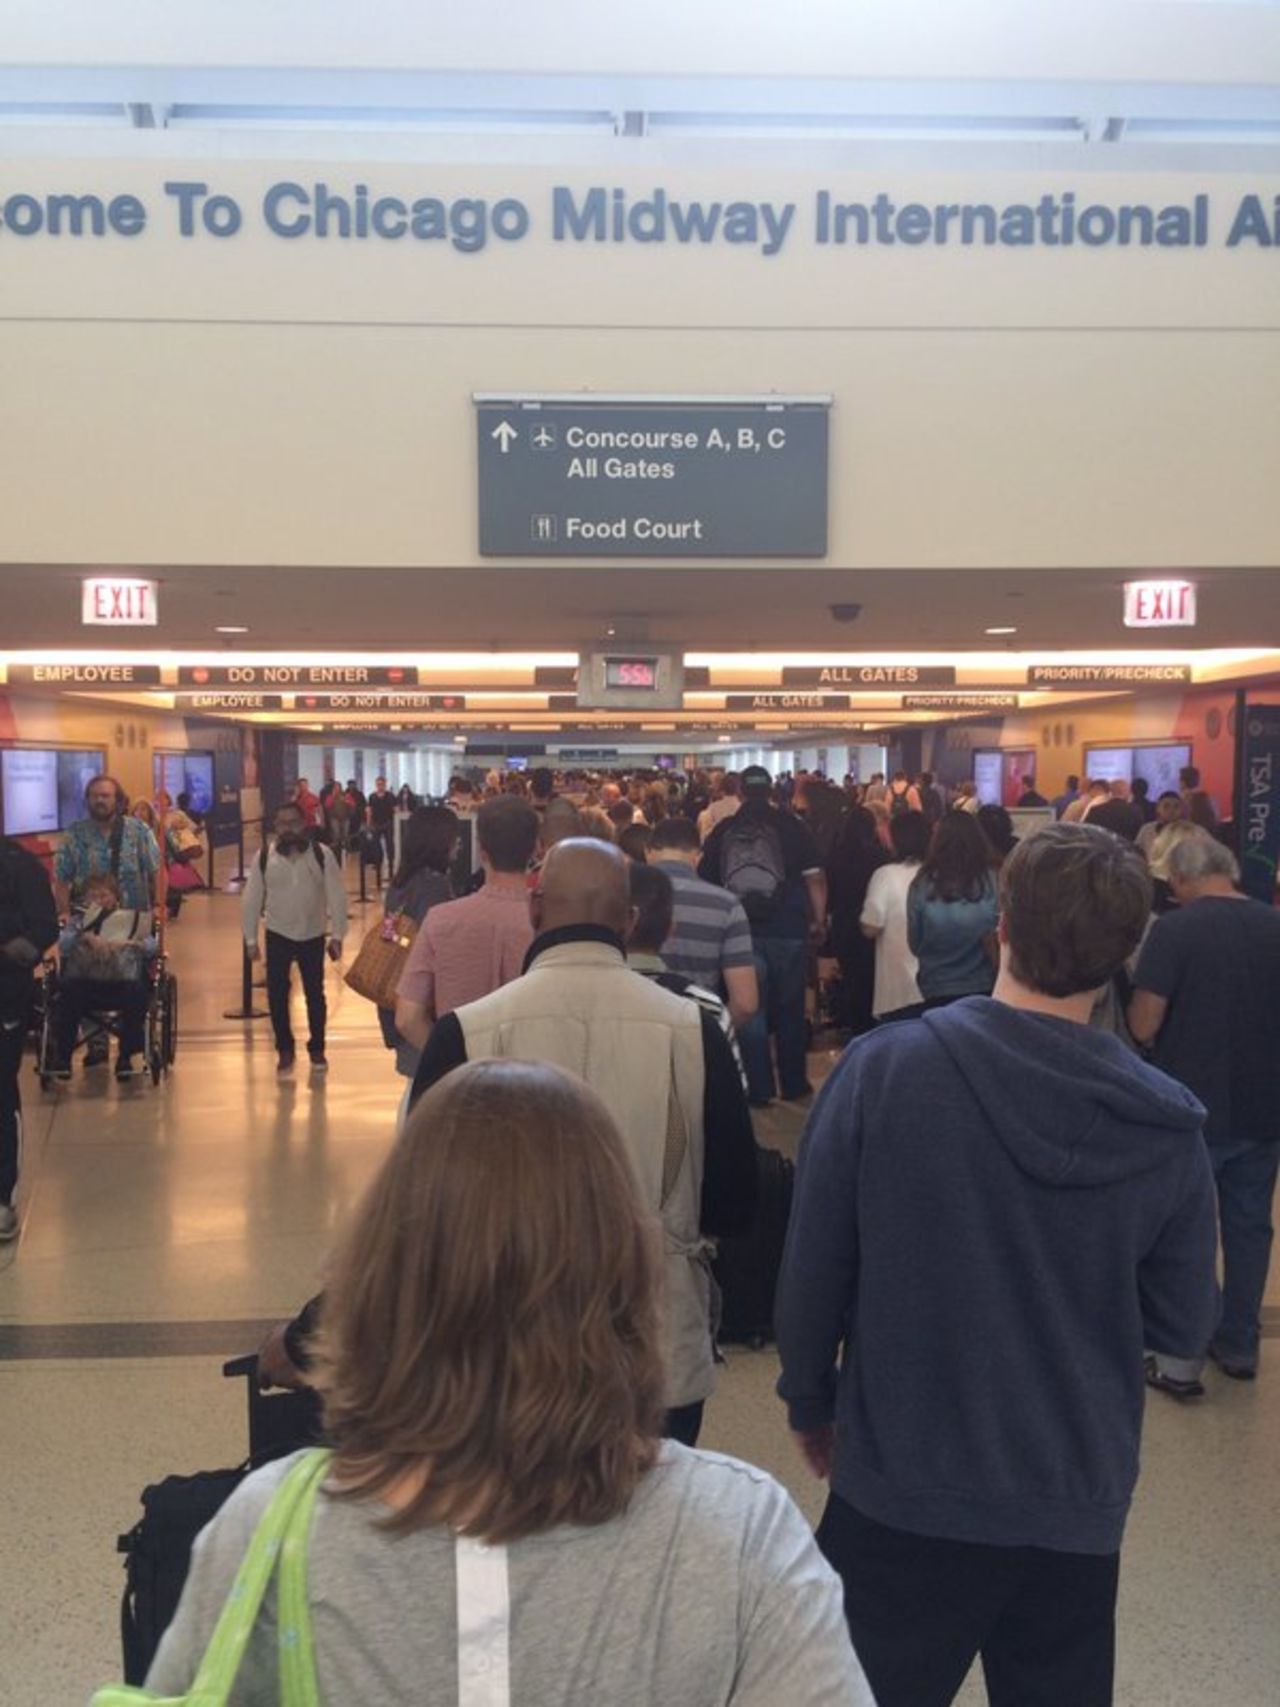 Siobhan O'Neill said the line at Chicago Midway International Airport looked really long on Thursday, but she was able to get through security in 40 minutes.